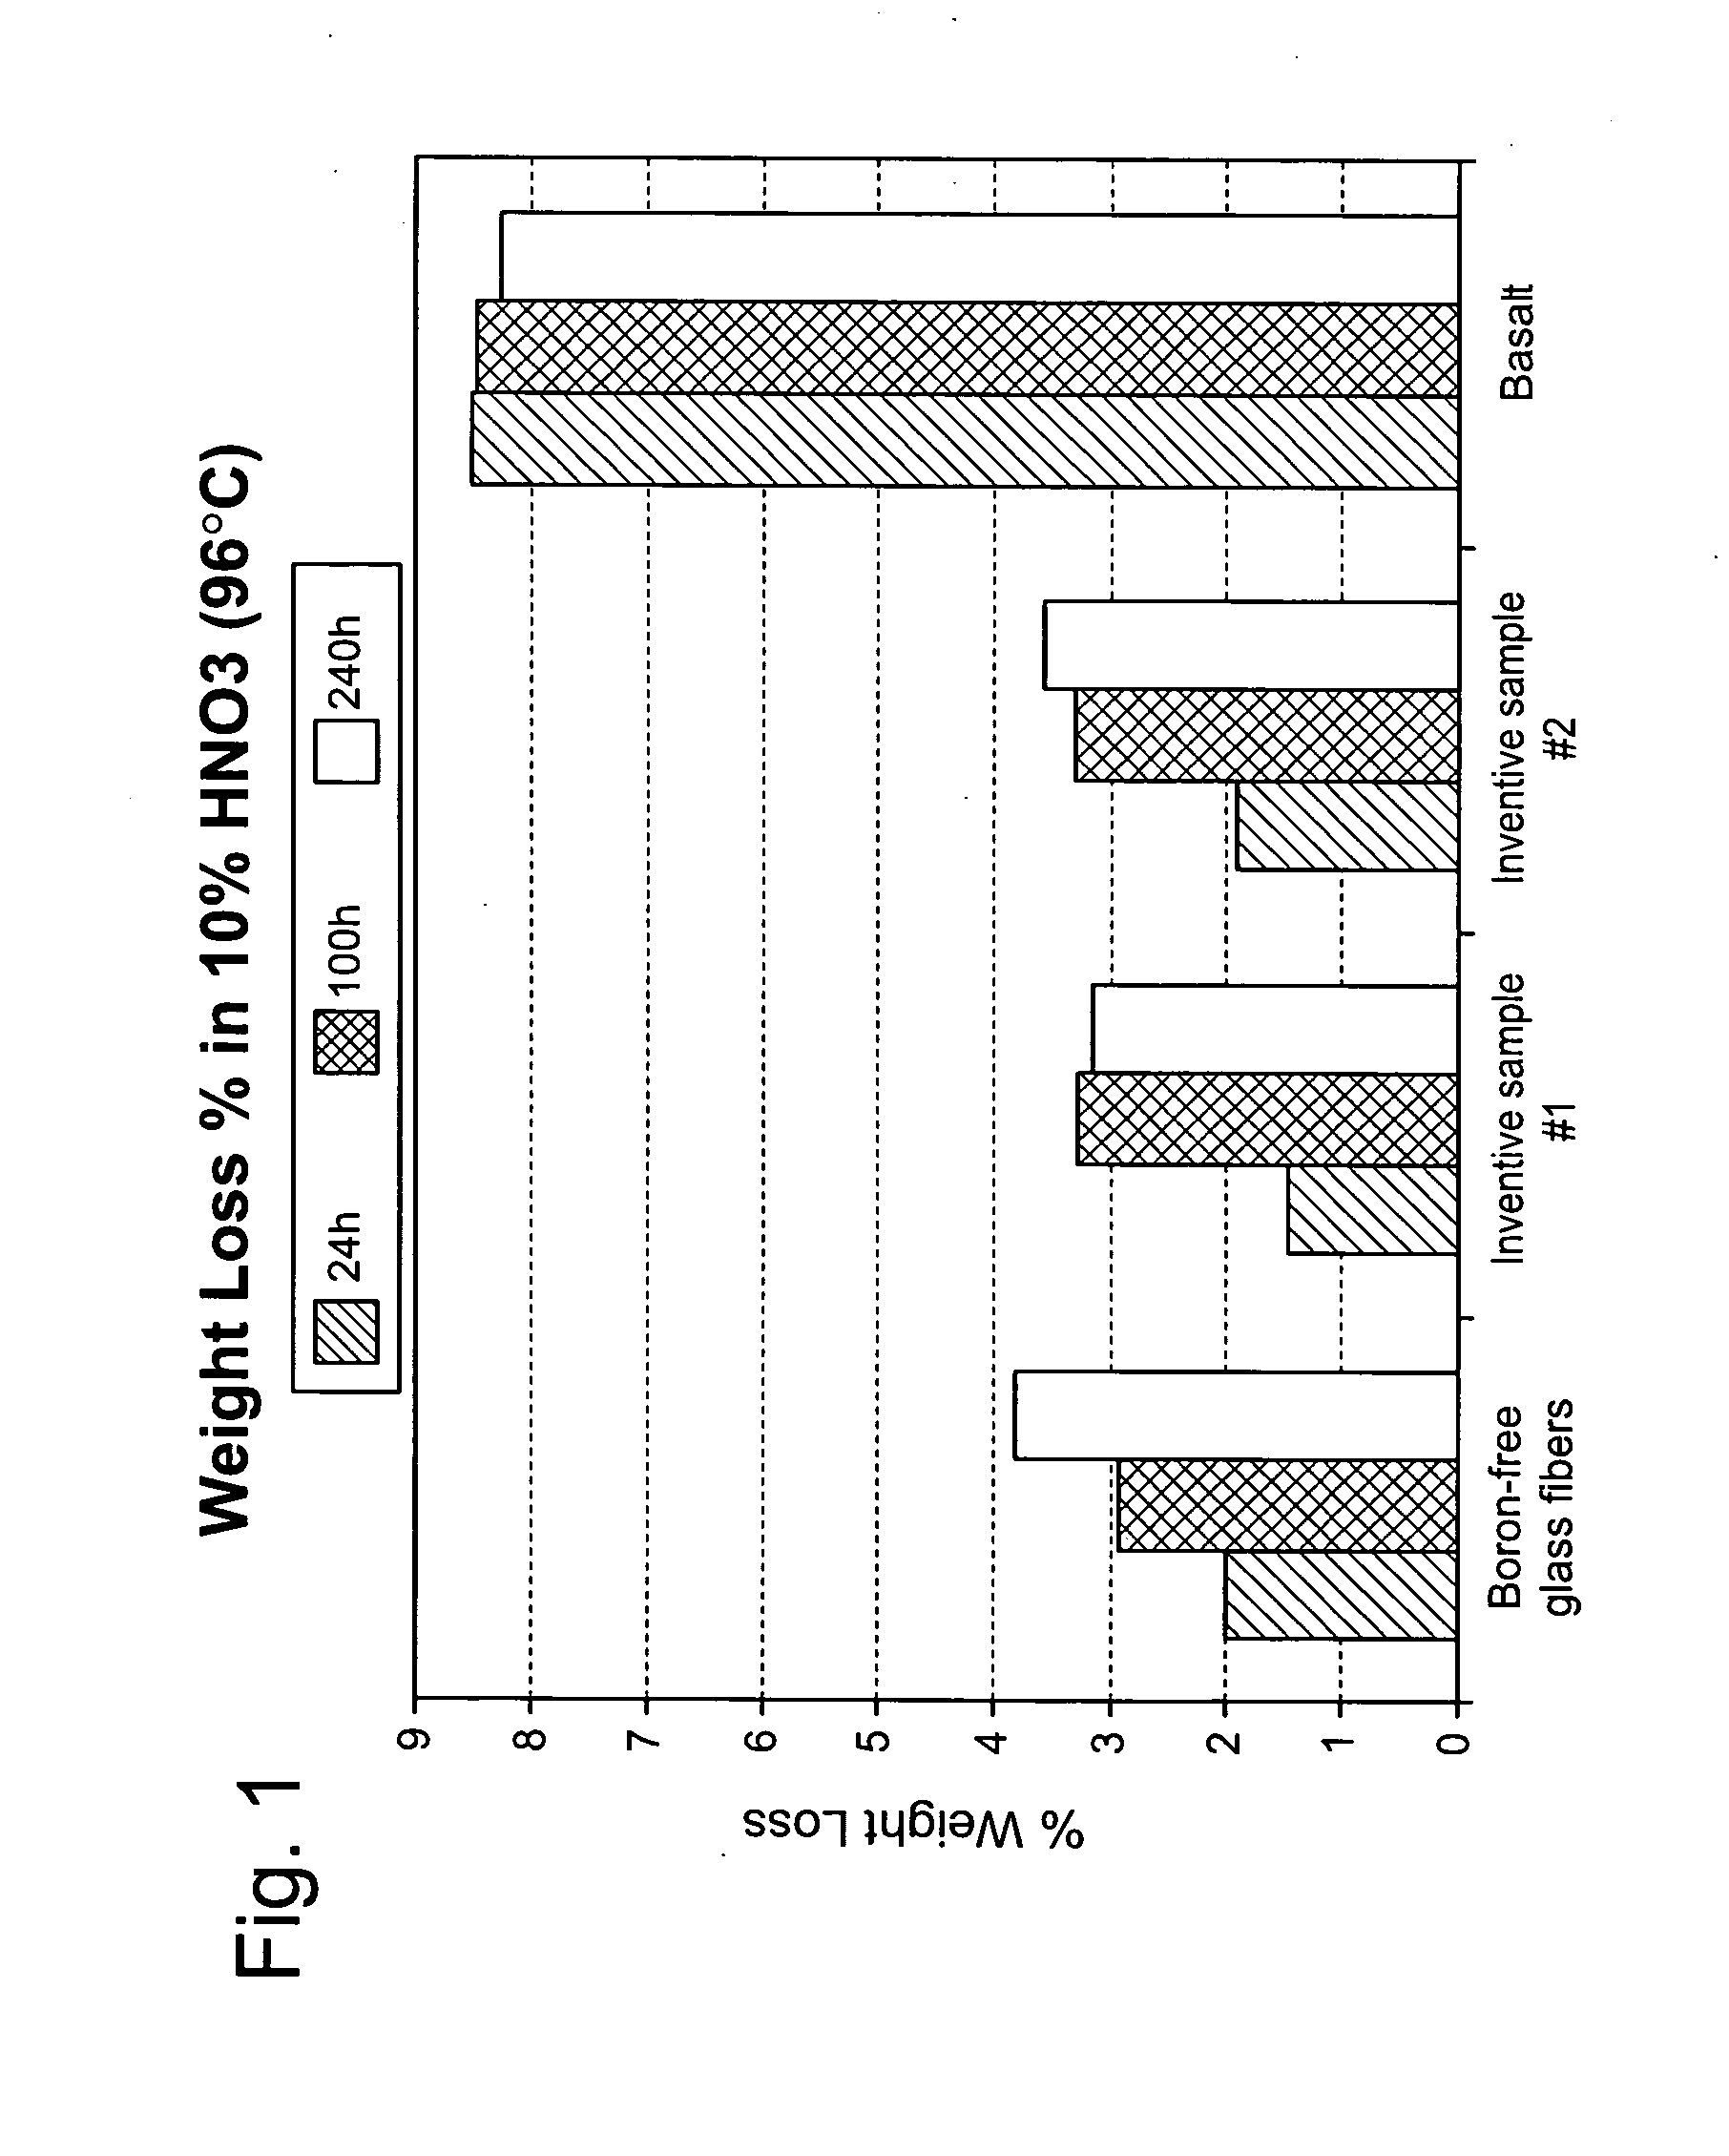 Composition for high performance glass, high performance glass fibers and articles therefrom